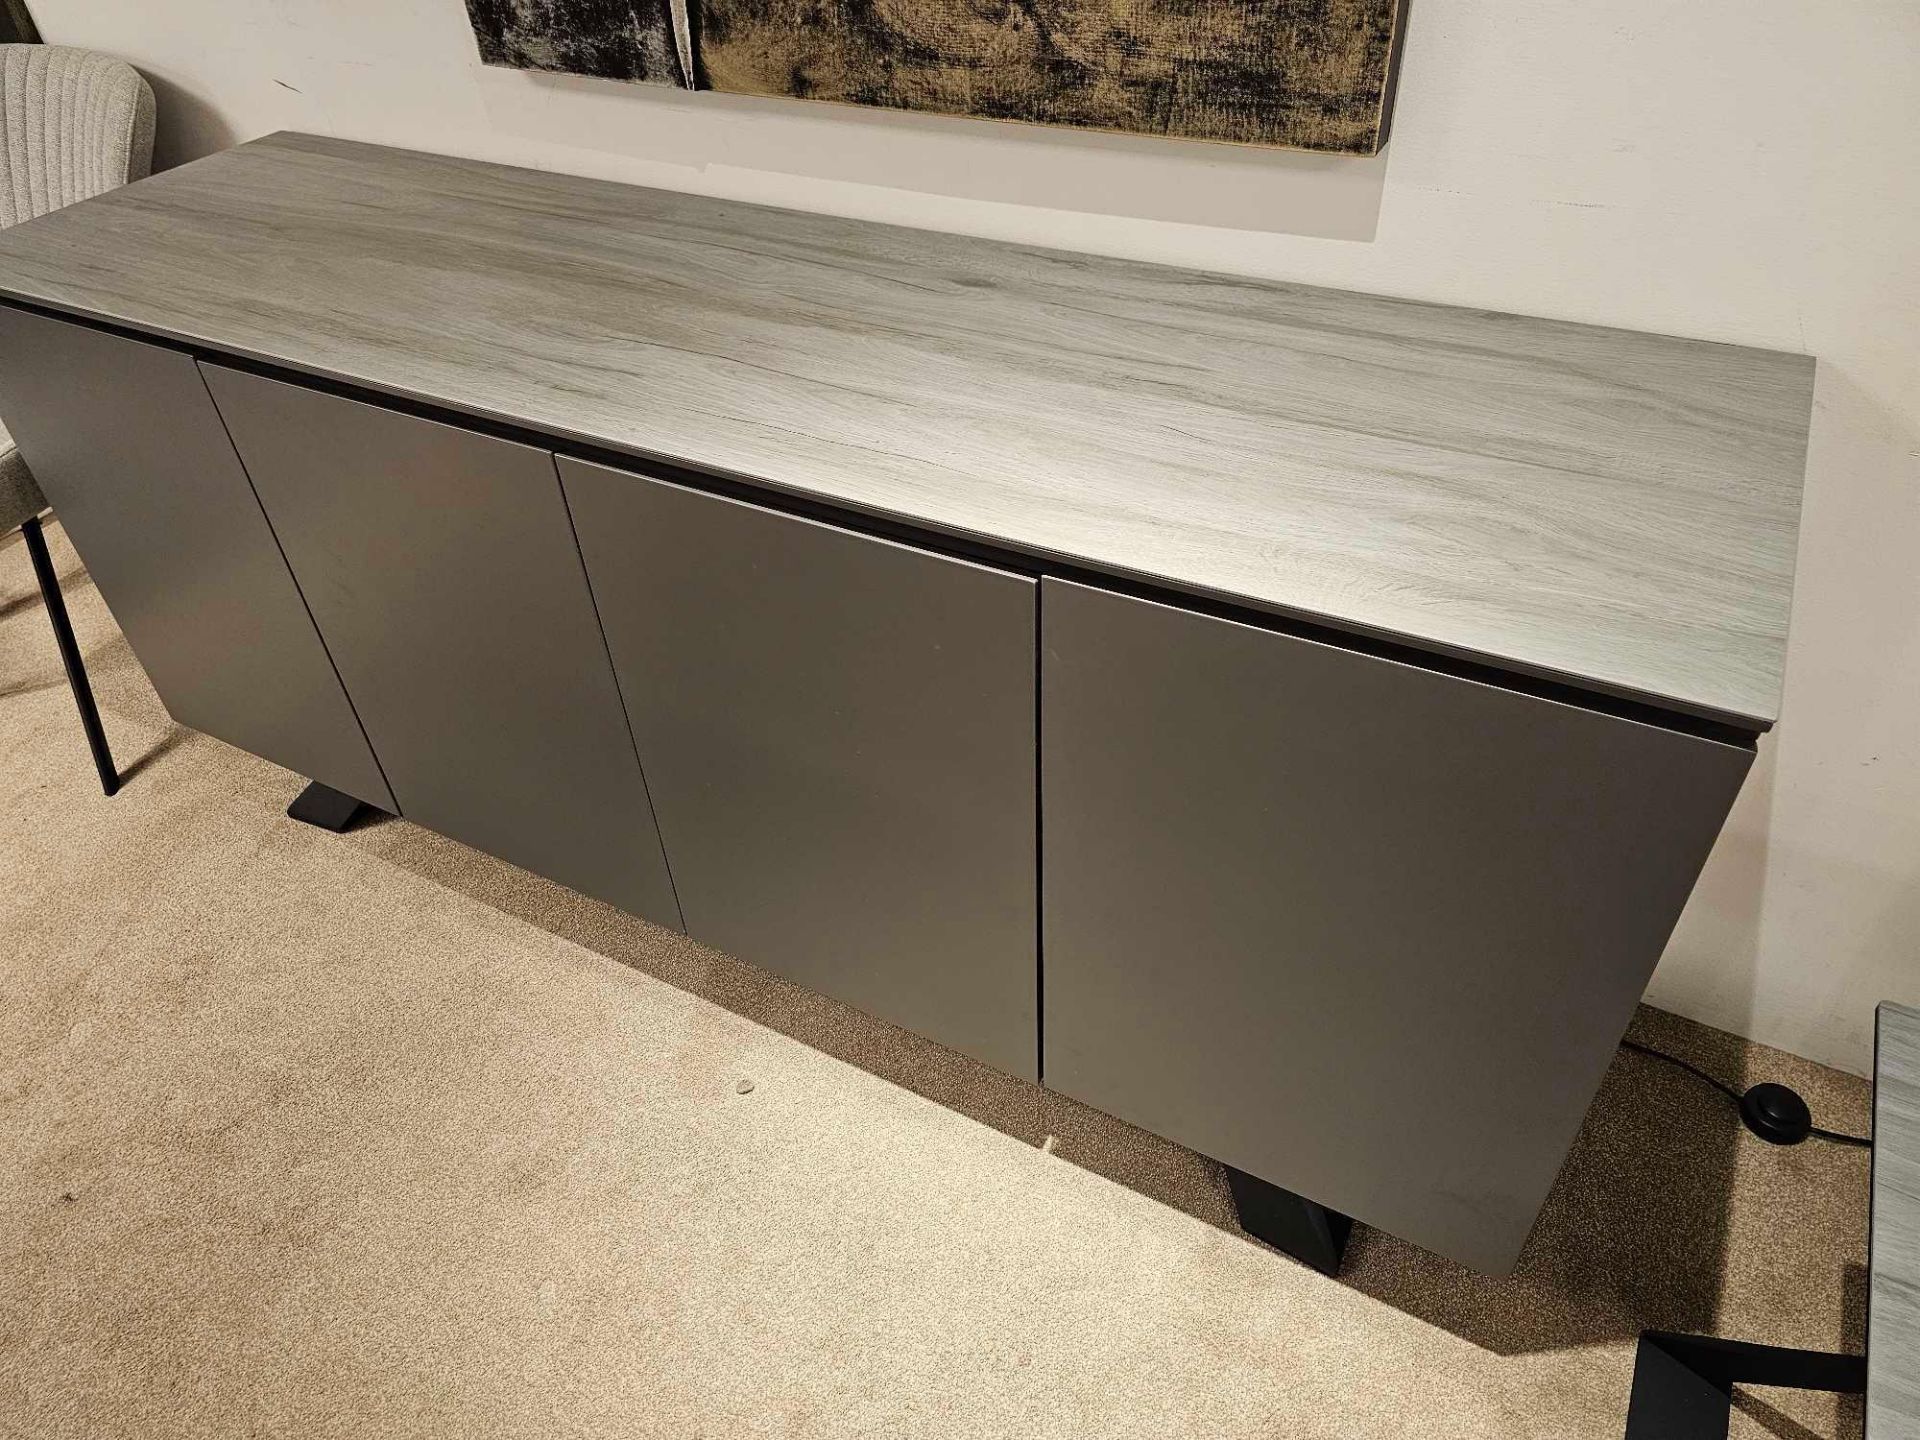 Spartan Sideboard by Kesterport The Spartan Four Door Sideboard provides is striking as a stand - Image 5 of 12